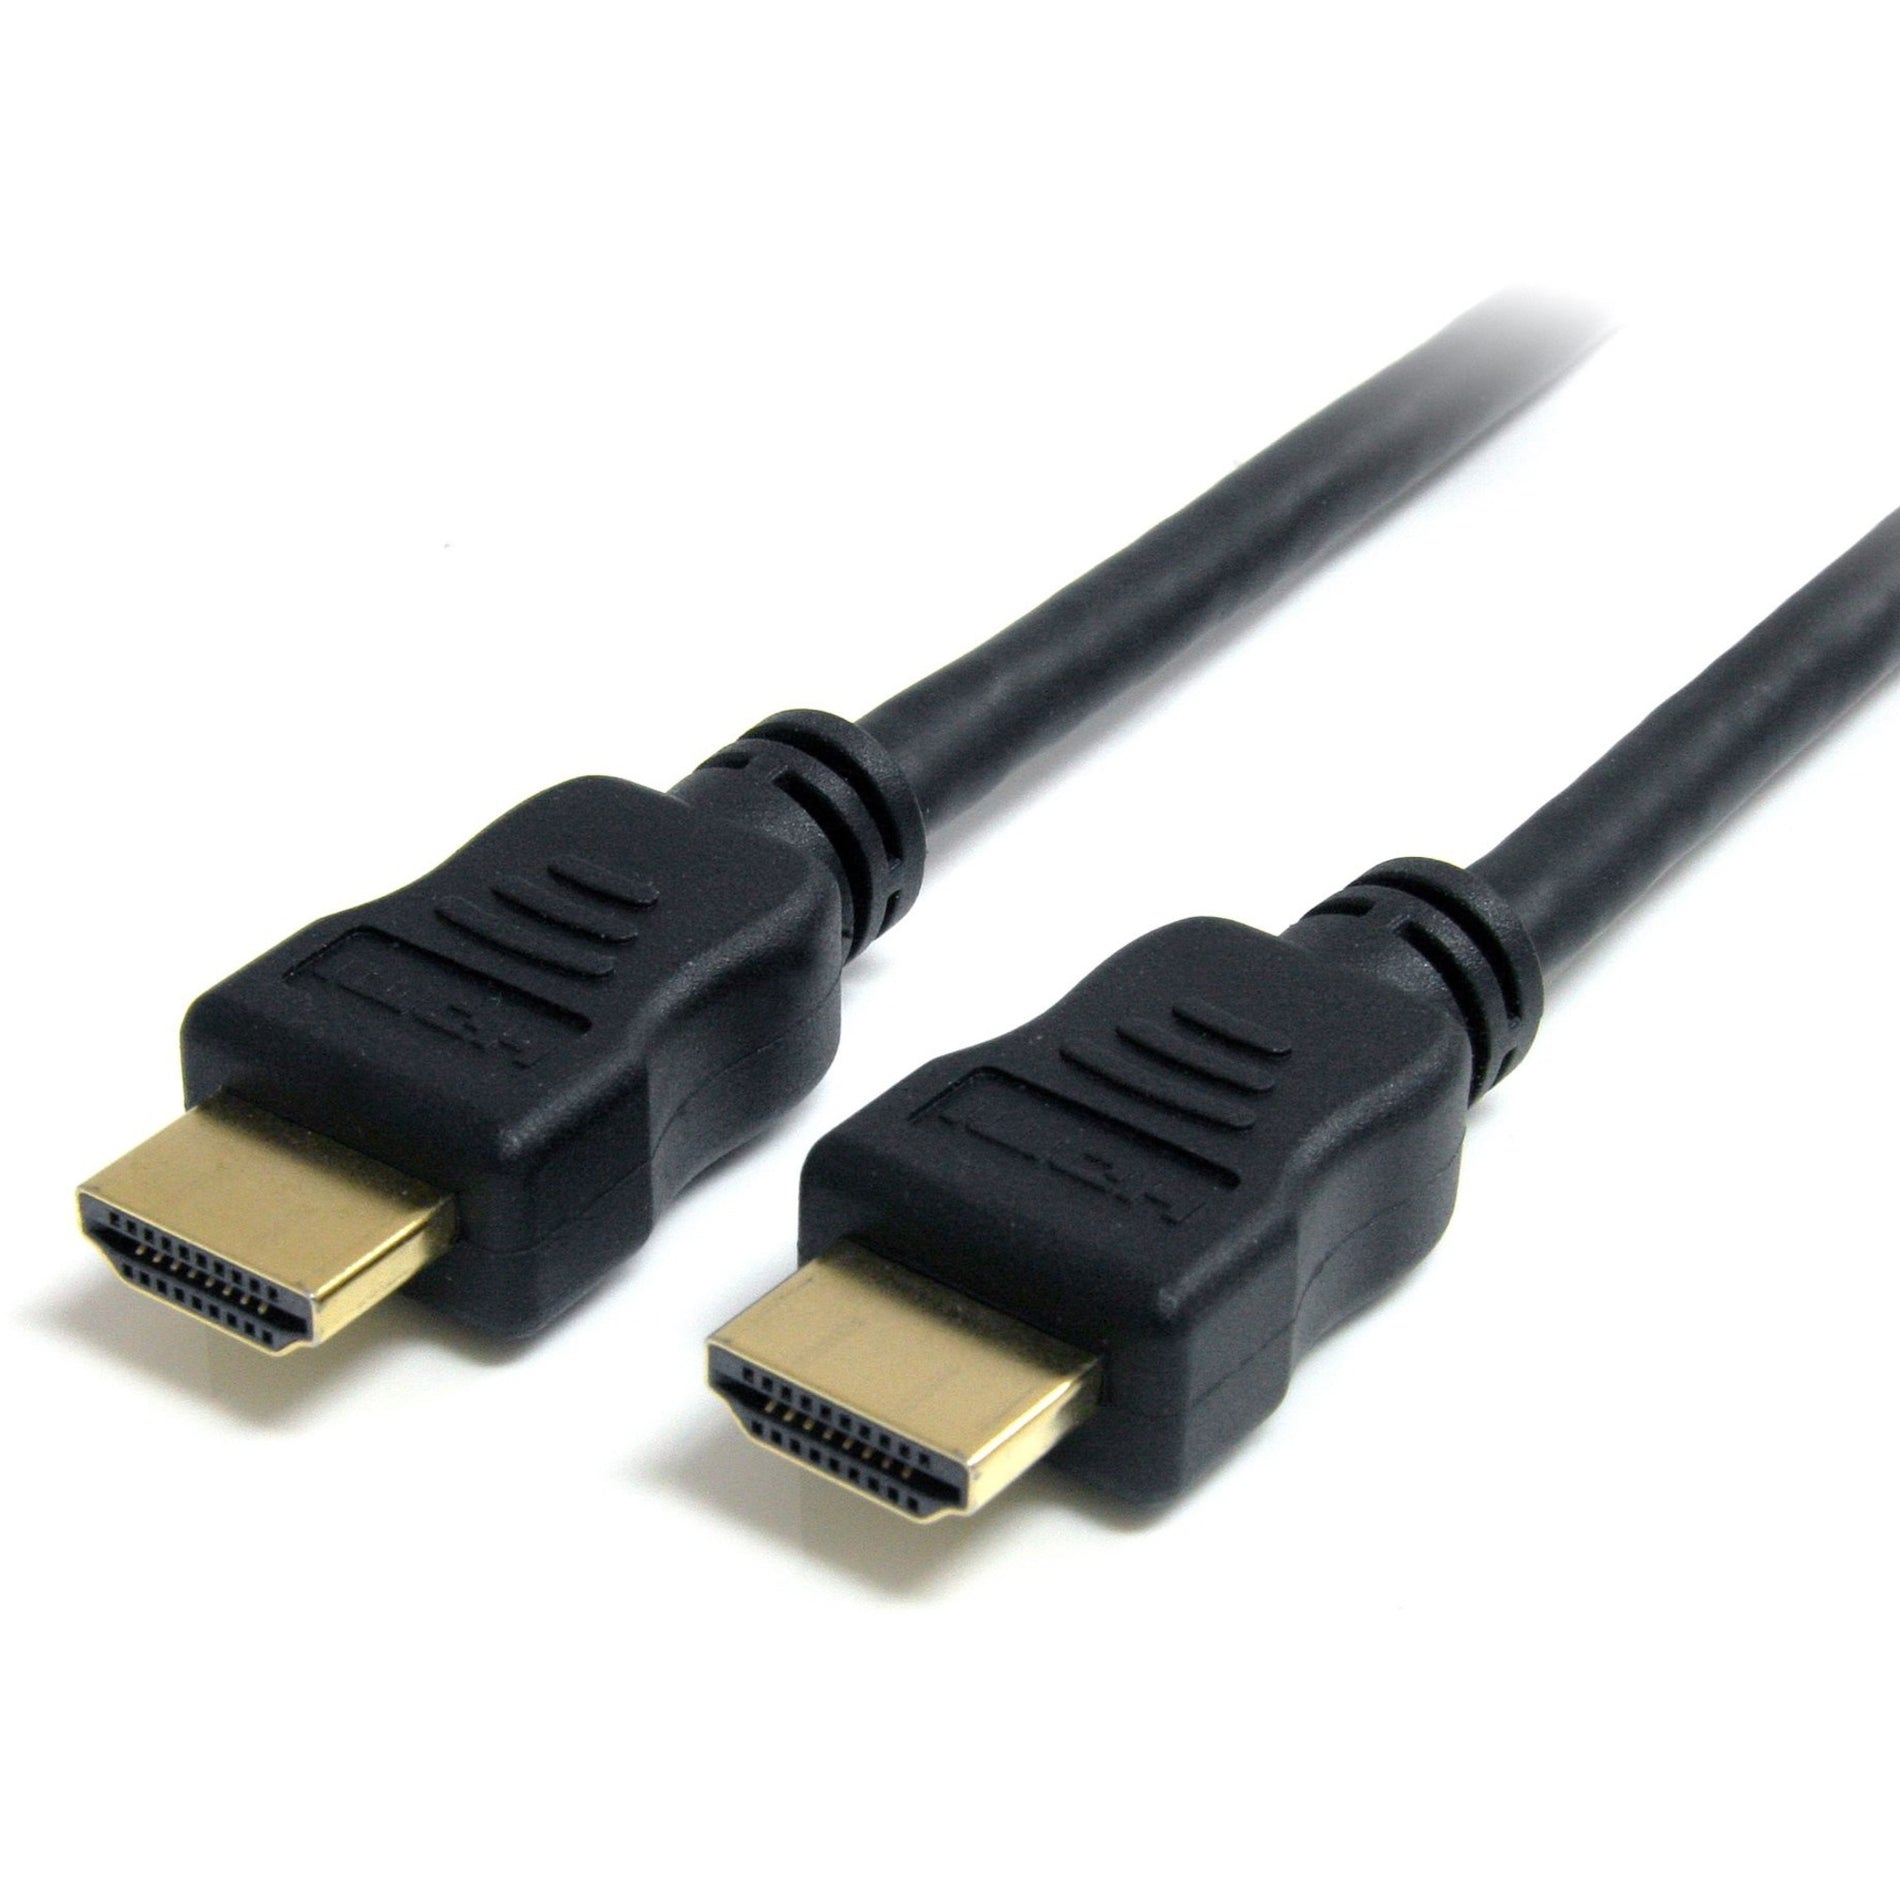 StarTech.com HDMIMM3HS 3 ft High Speed HDMI Digital Video Cable with Ethernet, Corrosion Resistant, 4096 x 2160 Supported Resolution